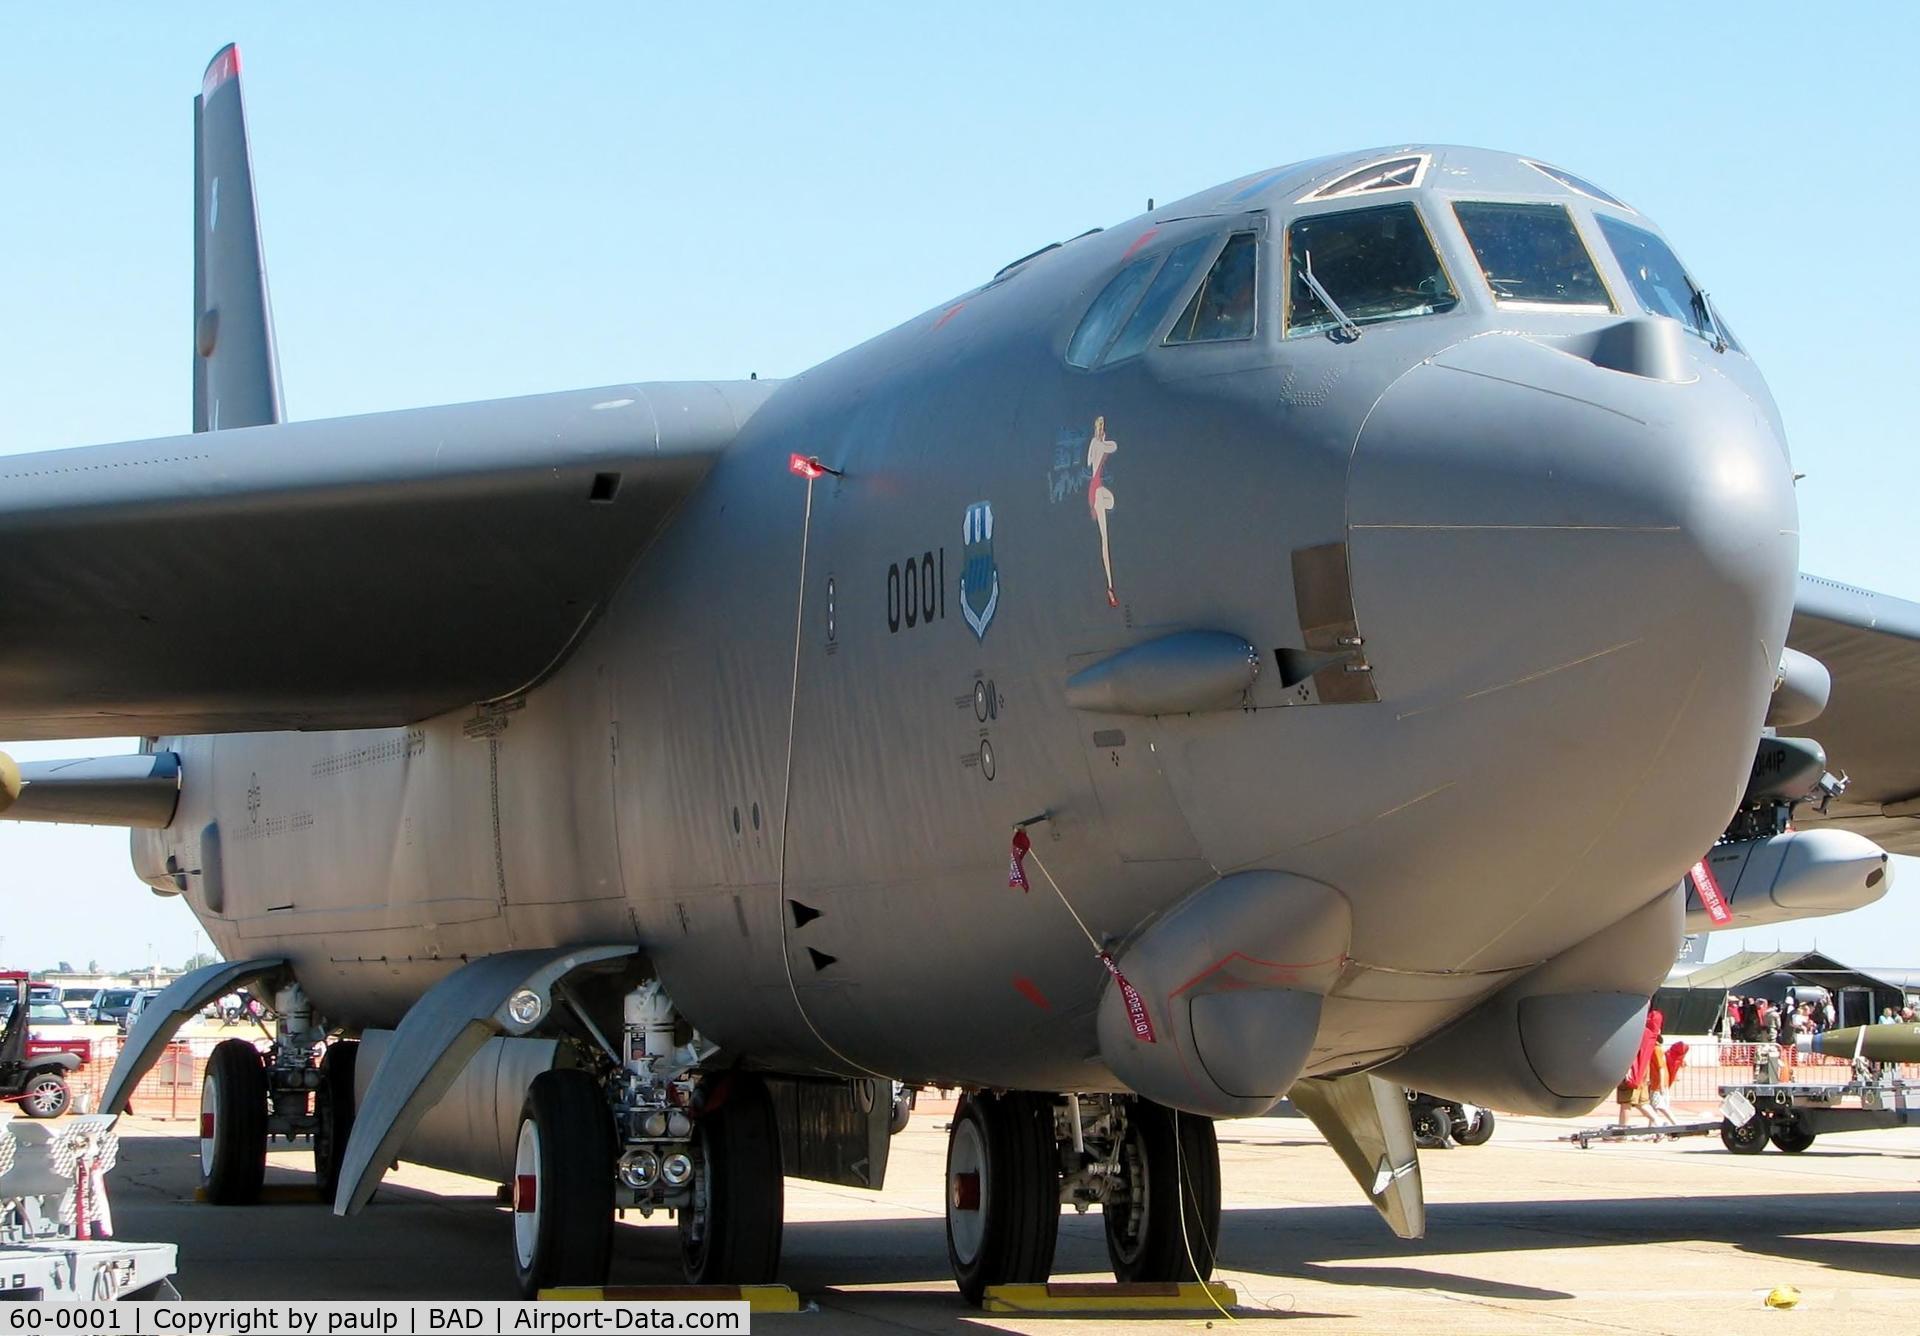 60-0001, 1960 Boeing B-52H Stratofortress C/N 464366, At Barksdale Air Force Base.